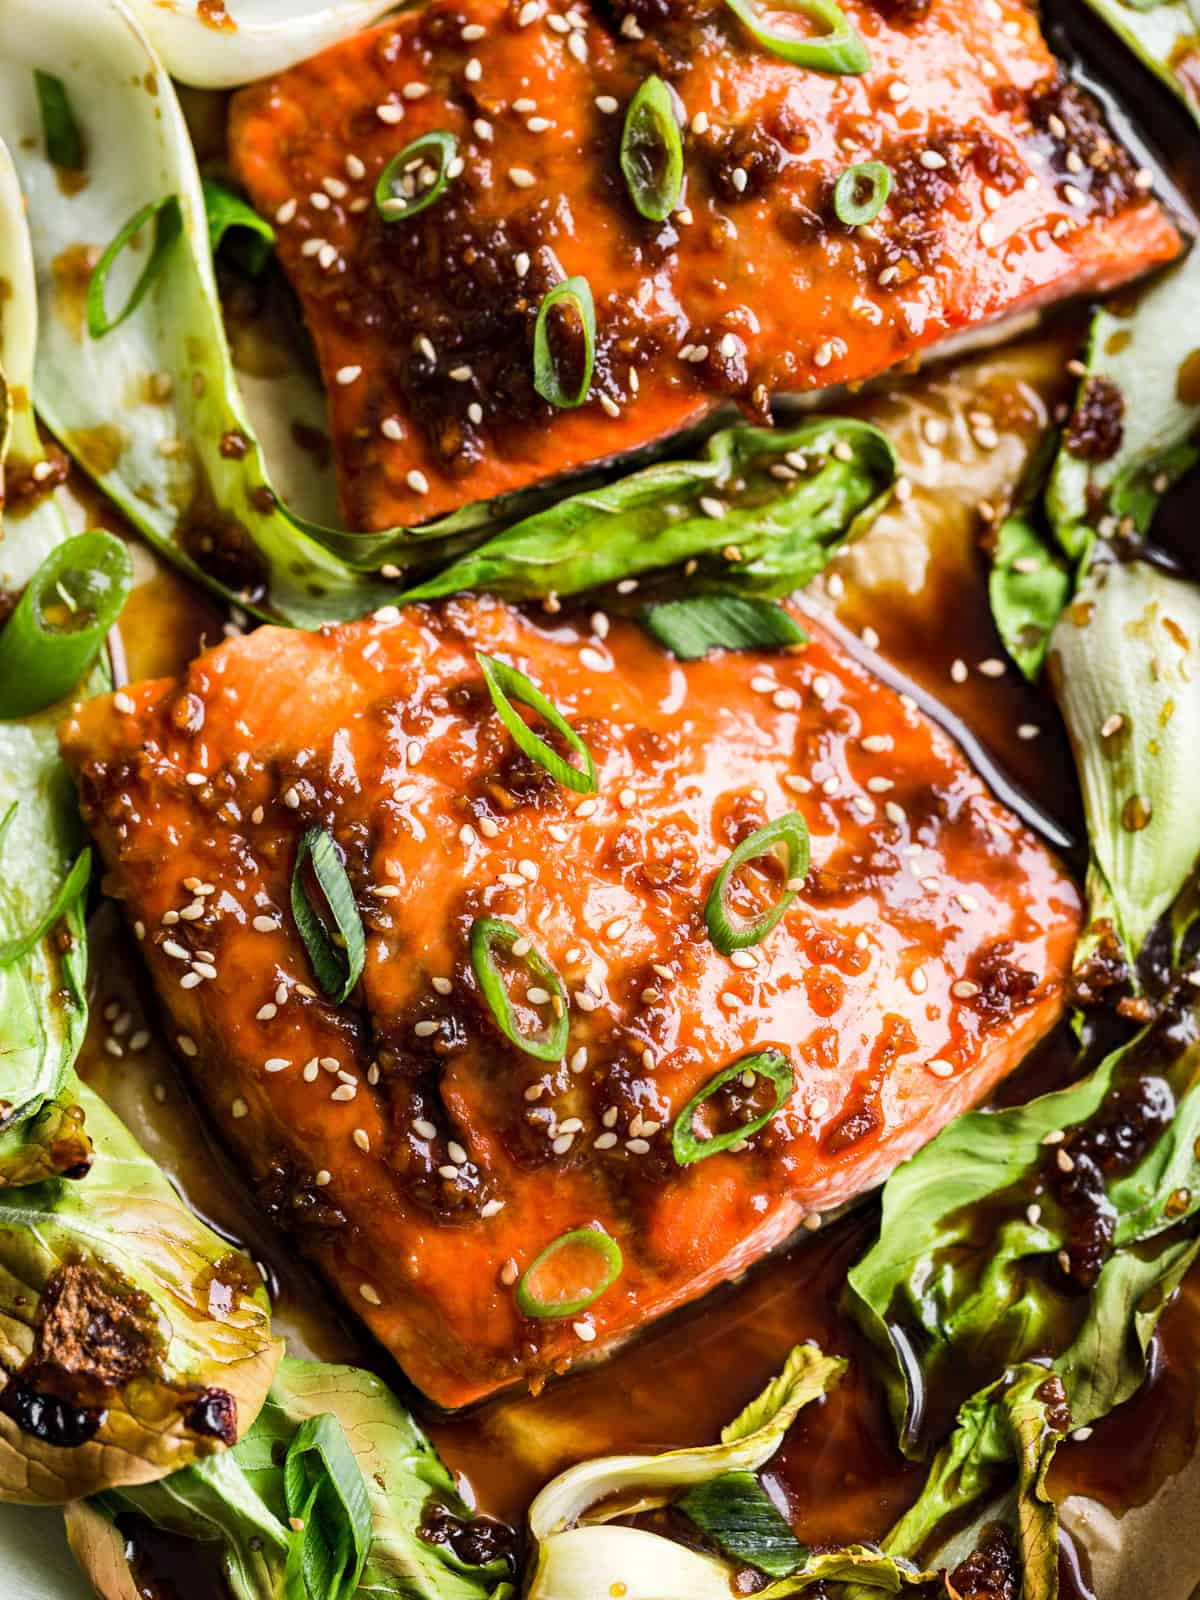 Salmon fillets and bok choy covered with teriyaki sauce and sprinkled with green onions.